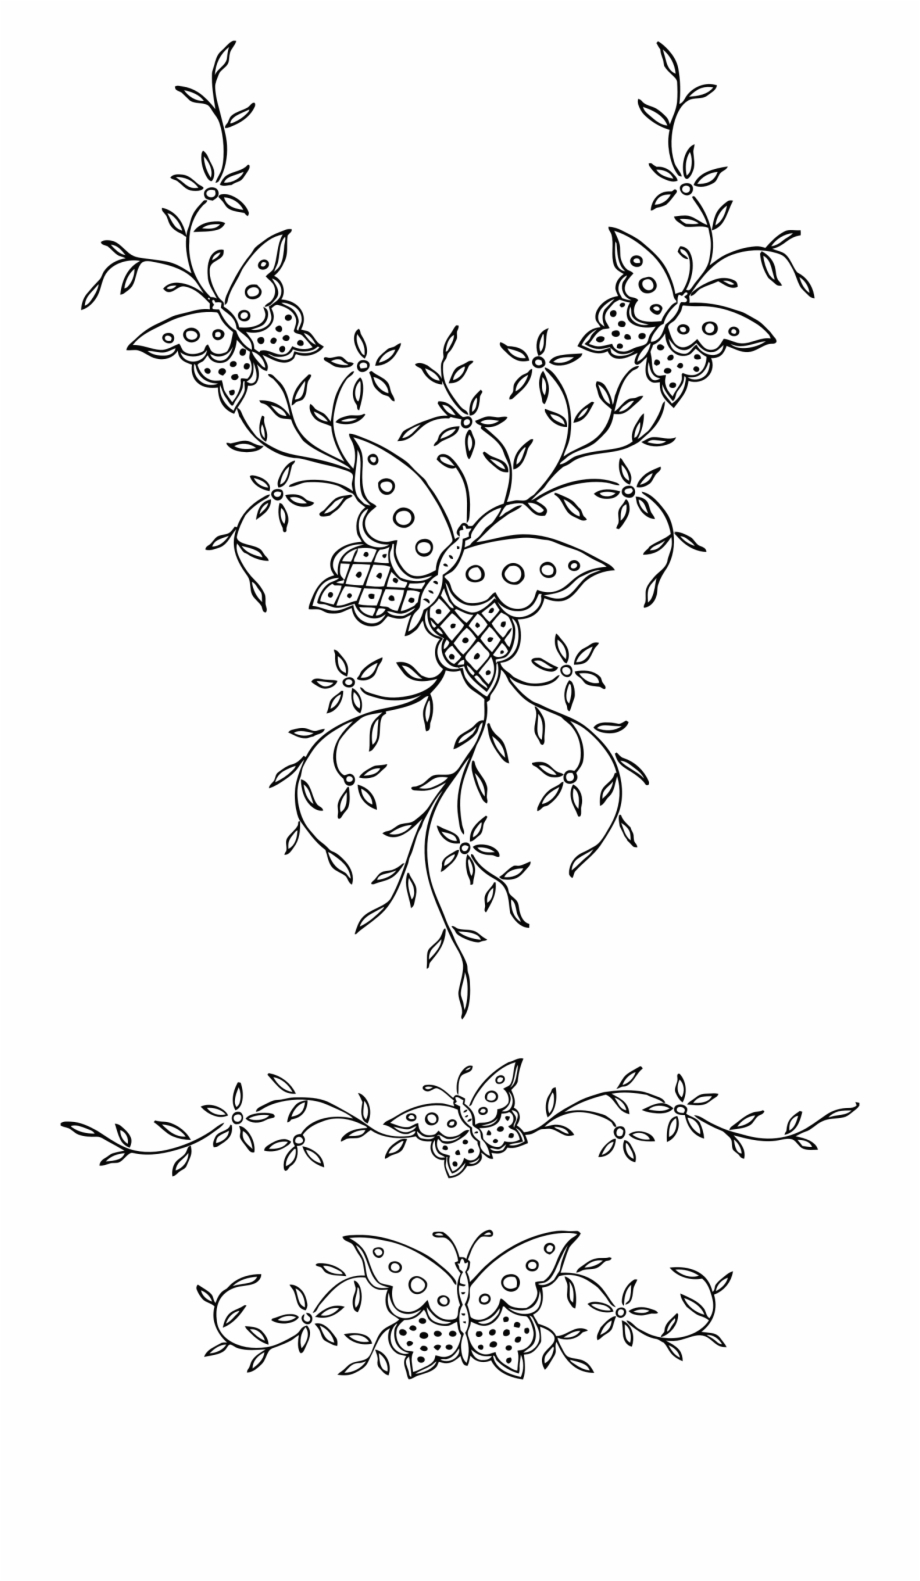 Embroidery Patterns Free This Free Icons Png Design Of Ornamental Butterflies Victorian